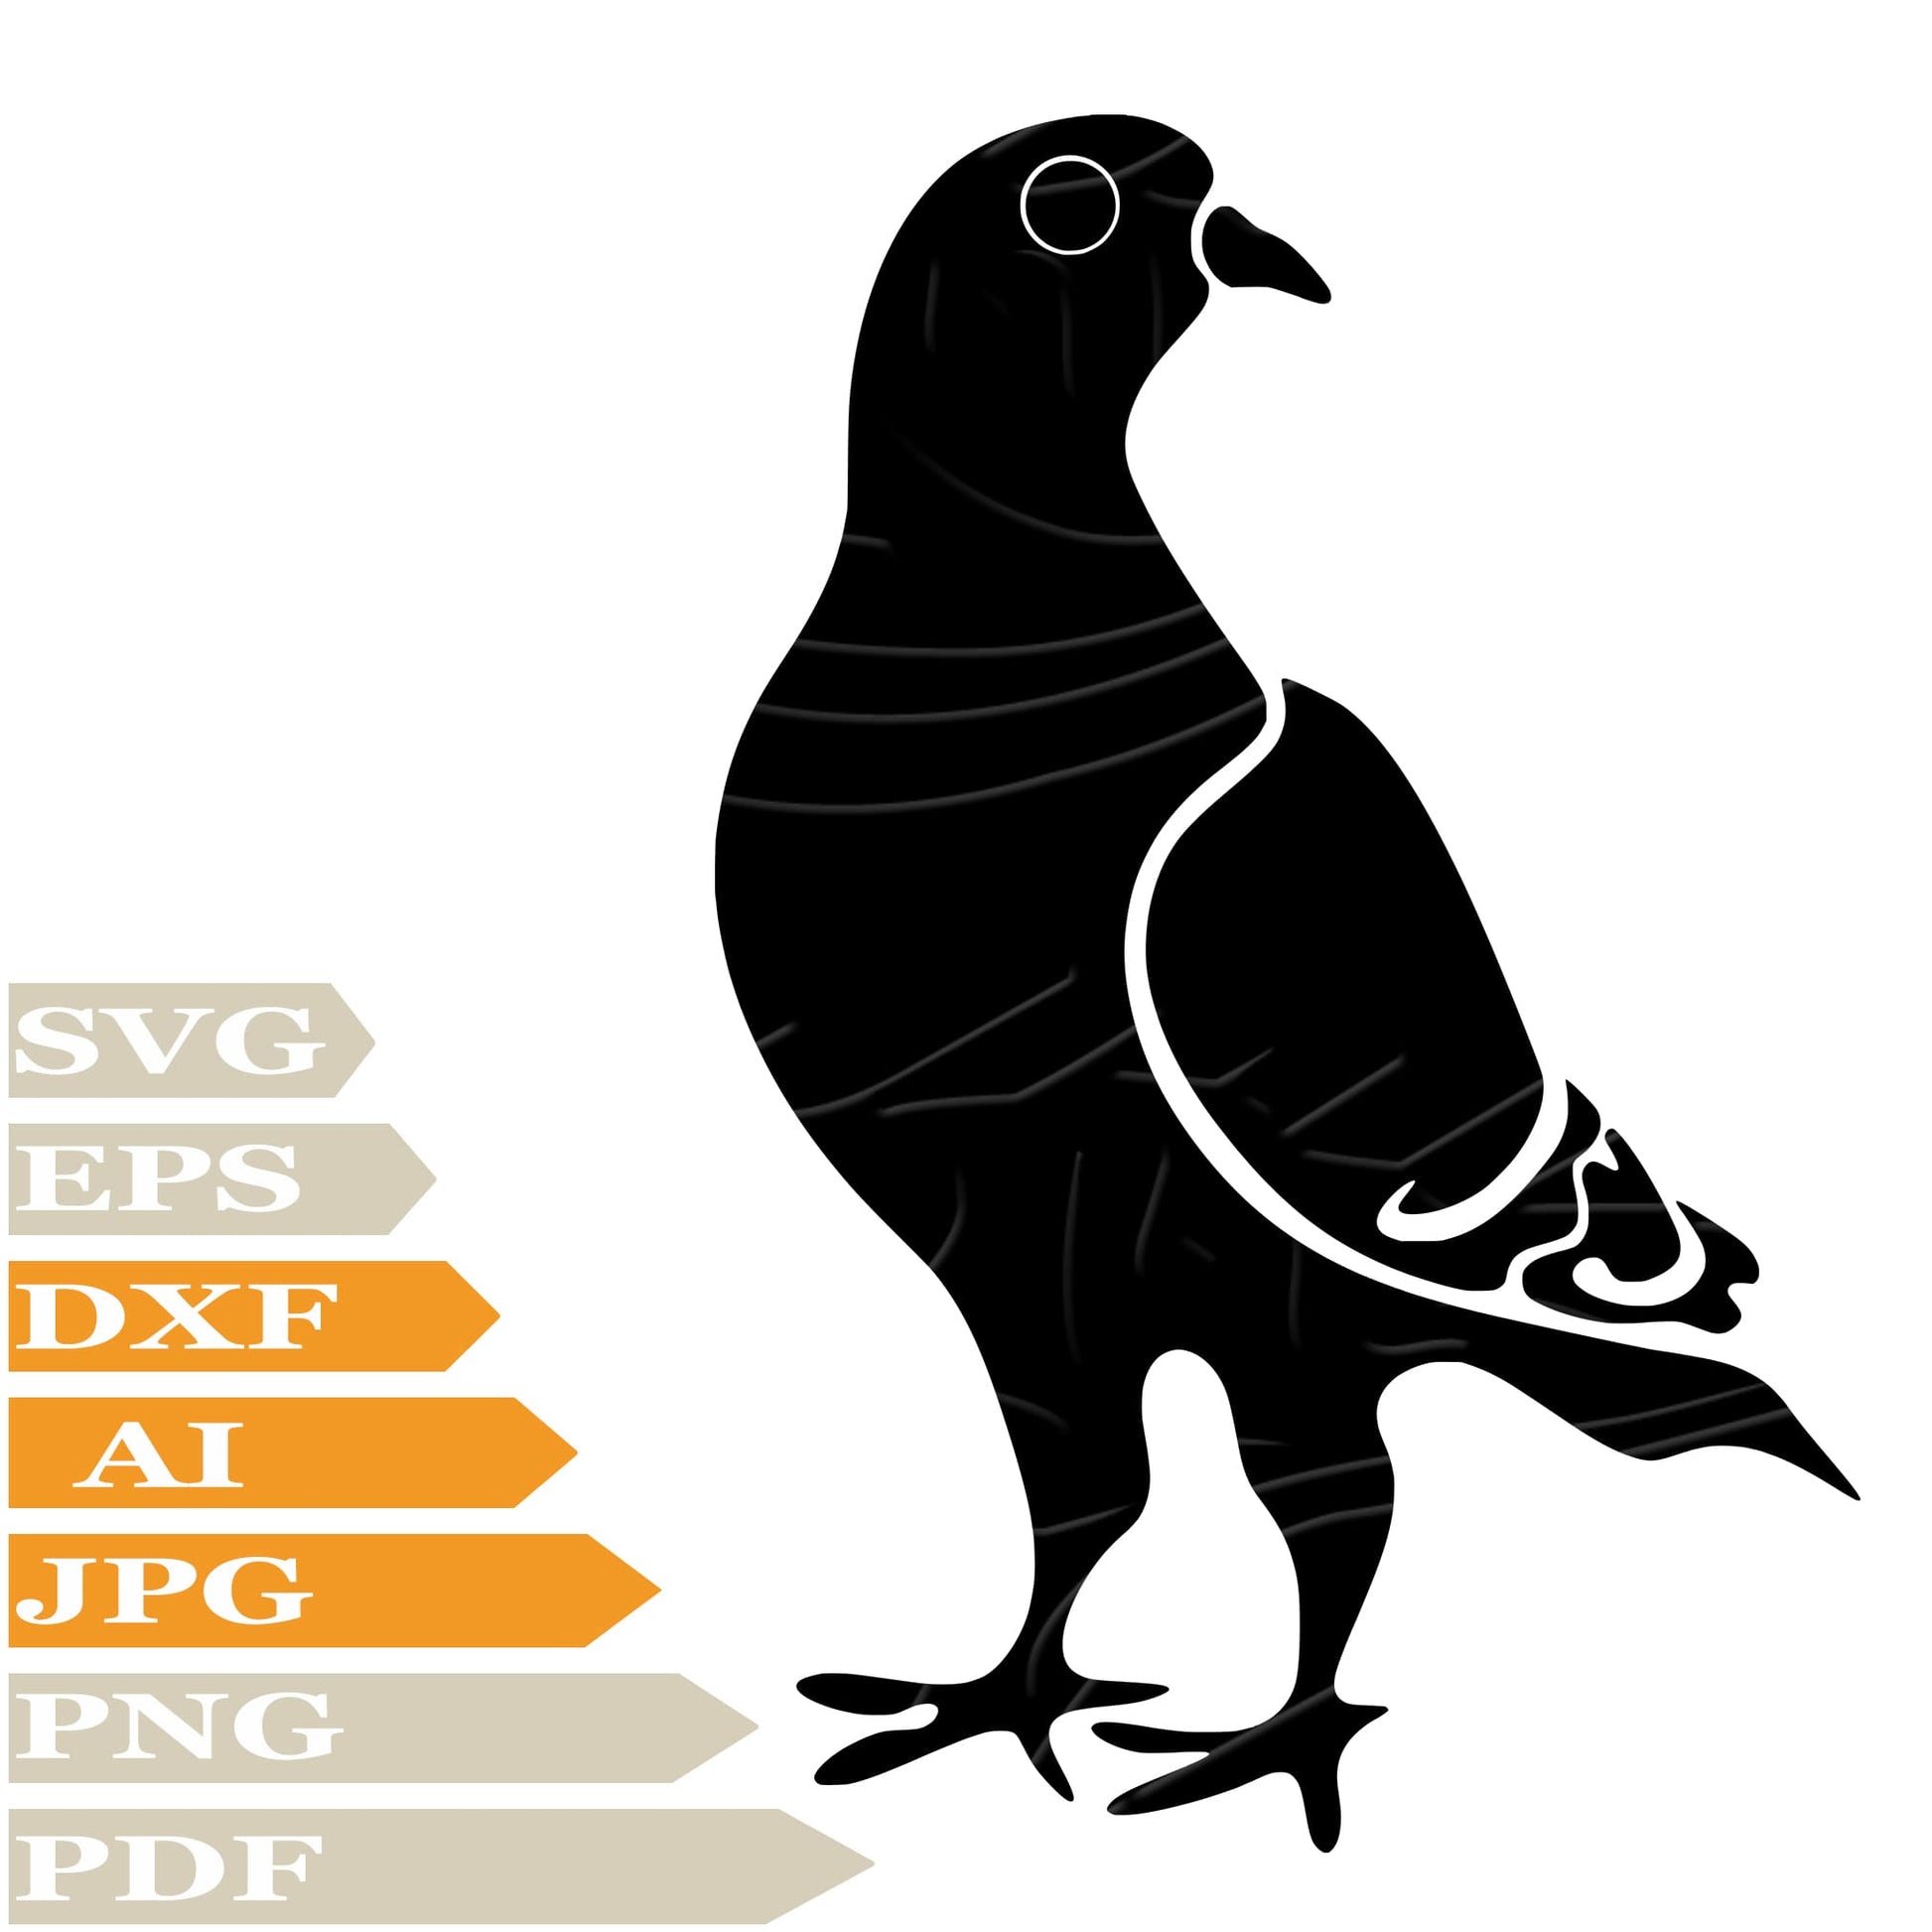 Pigeon SVG, Dove SVG Design, Bird Pigeon Vector Graphics, Pigeon For Cricut, For Tattoo, Clip Art, Cut File, T-Shirts, Silhouette, All Available